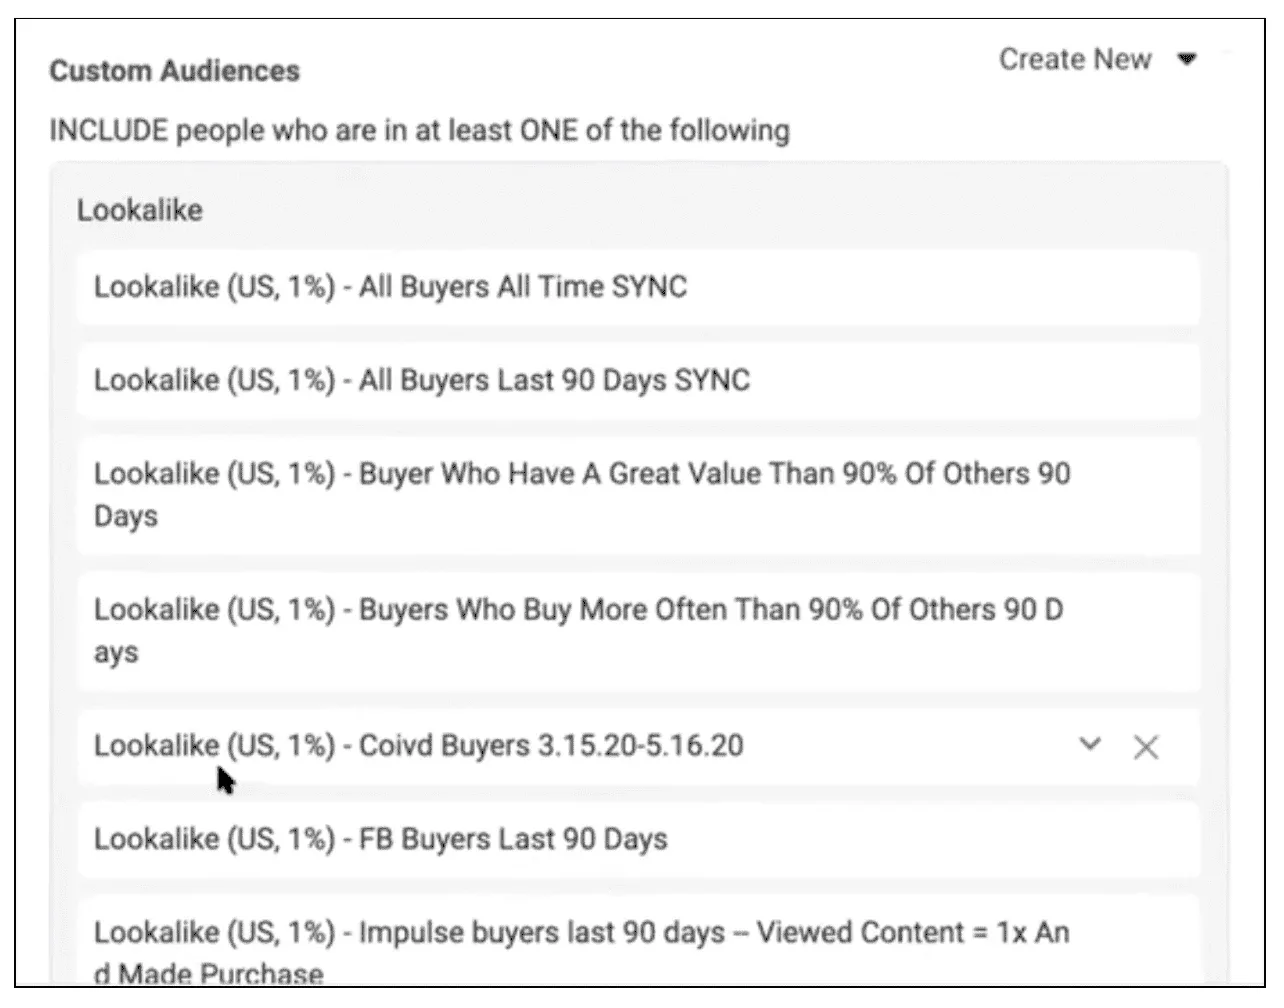 A list of different customer segments you can use to create lookalike audiences in Facebook Ads Manager.